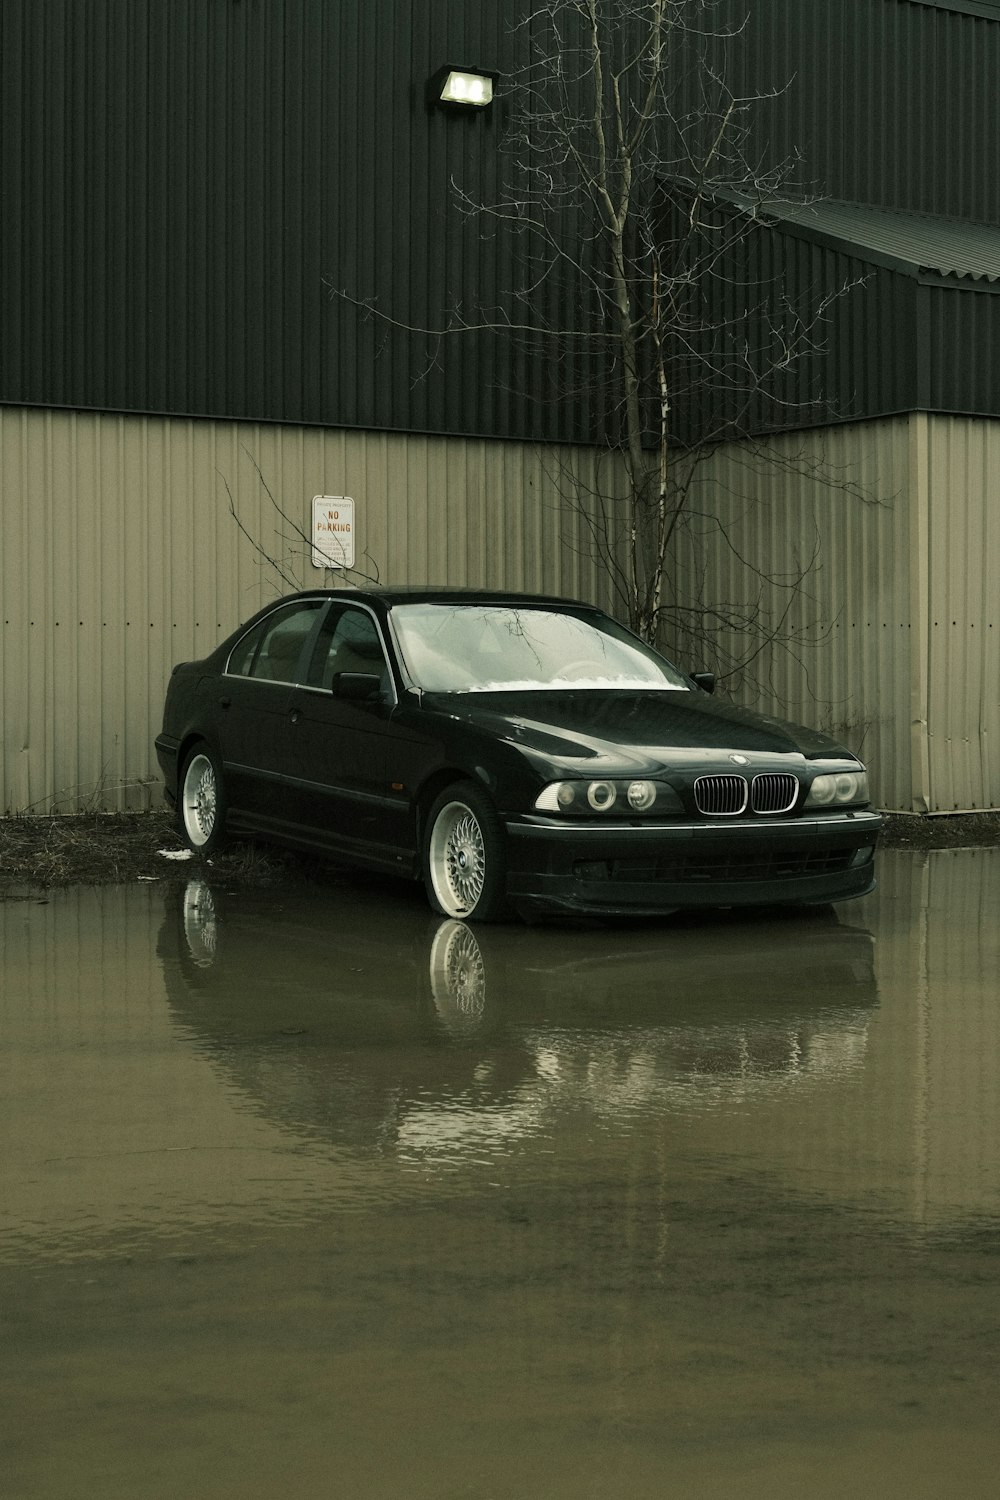 a black car parked in a flooded parking lot